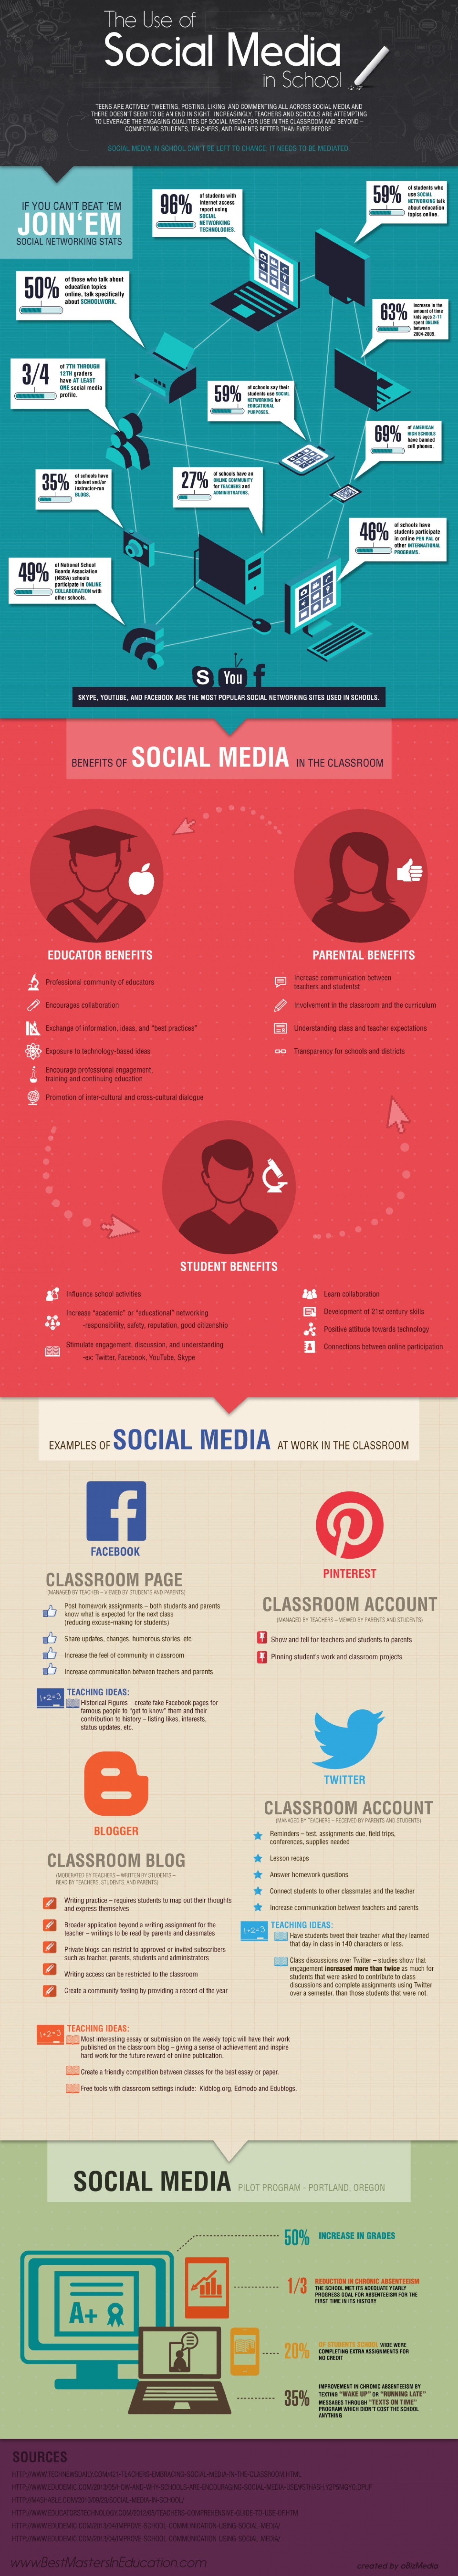 The Use of Social Media in School Infographic